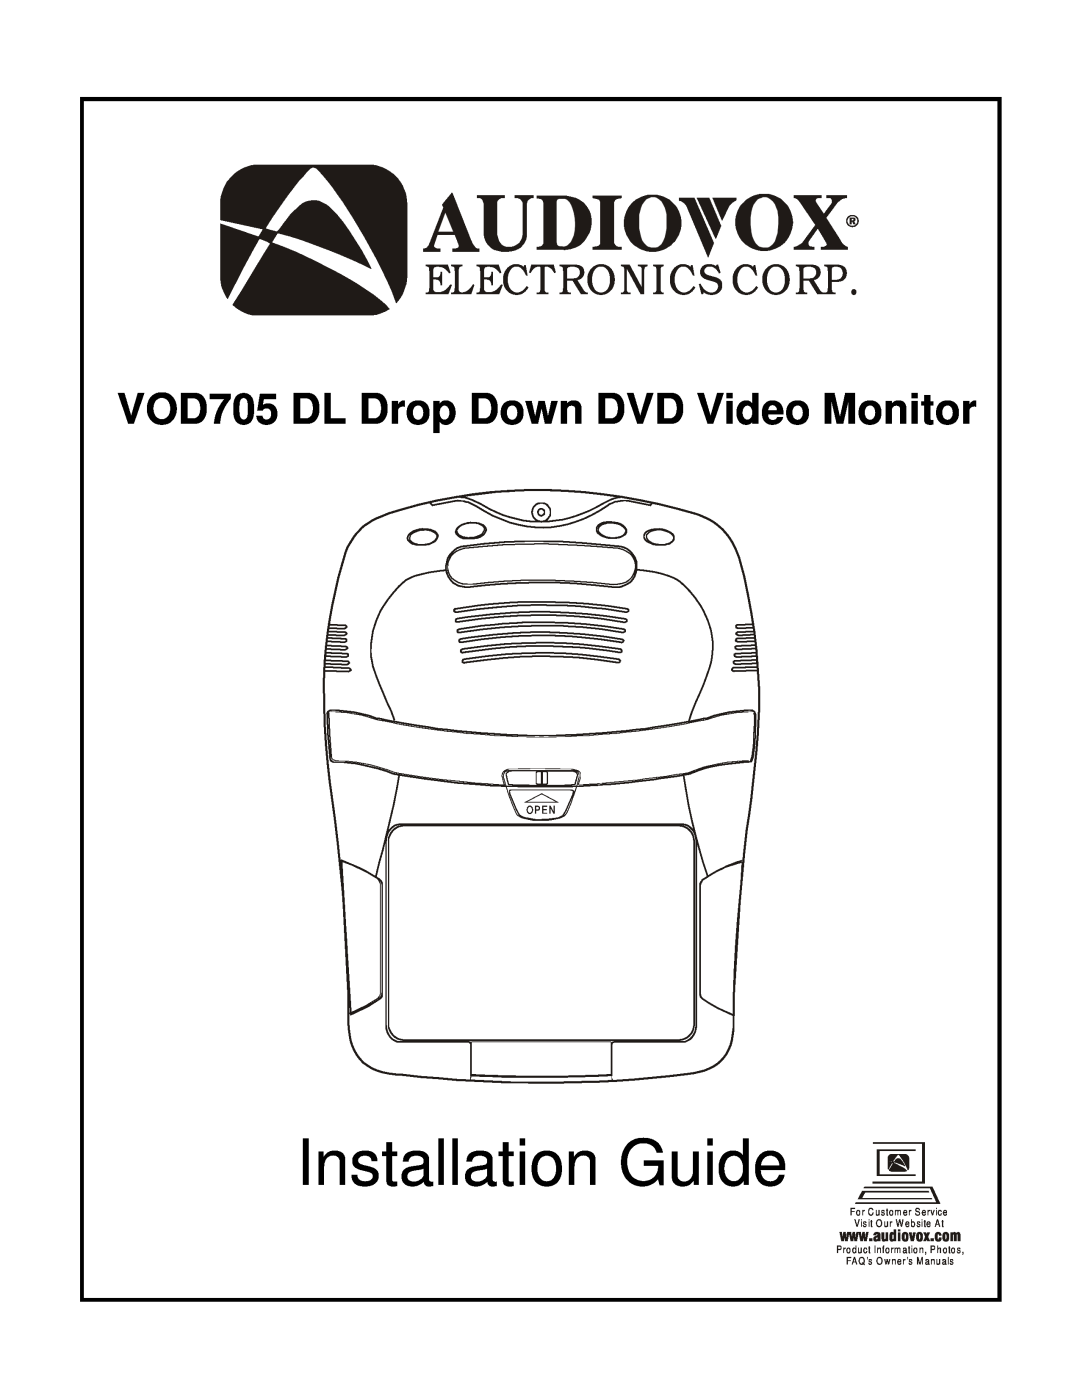 Audiovox owner manual Installation Guide, Electronics Corp, VOD705 DL Drop Down DVD Video Monitor, audiovox.com 